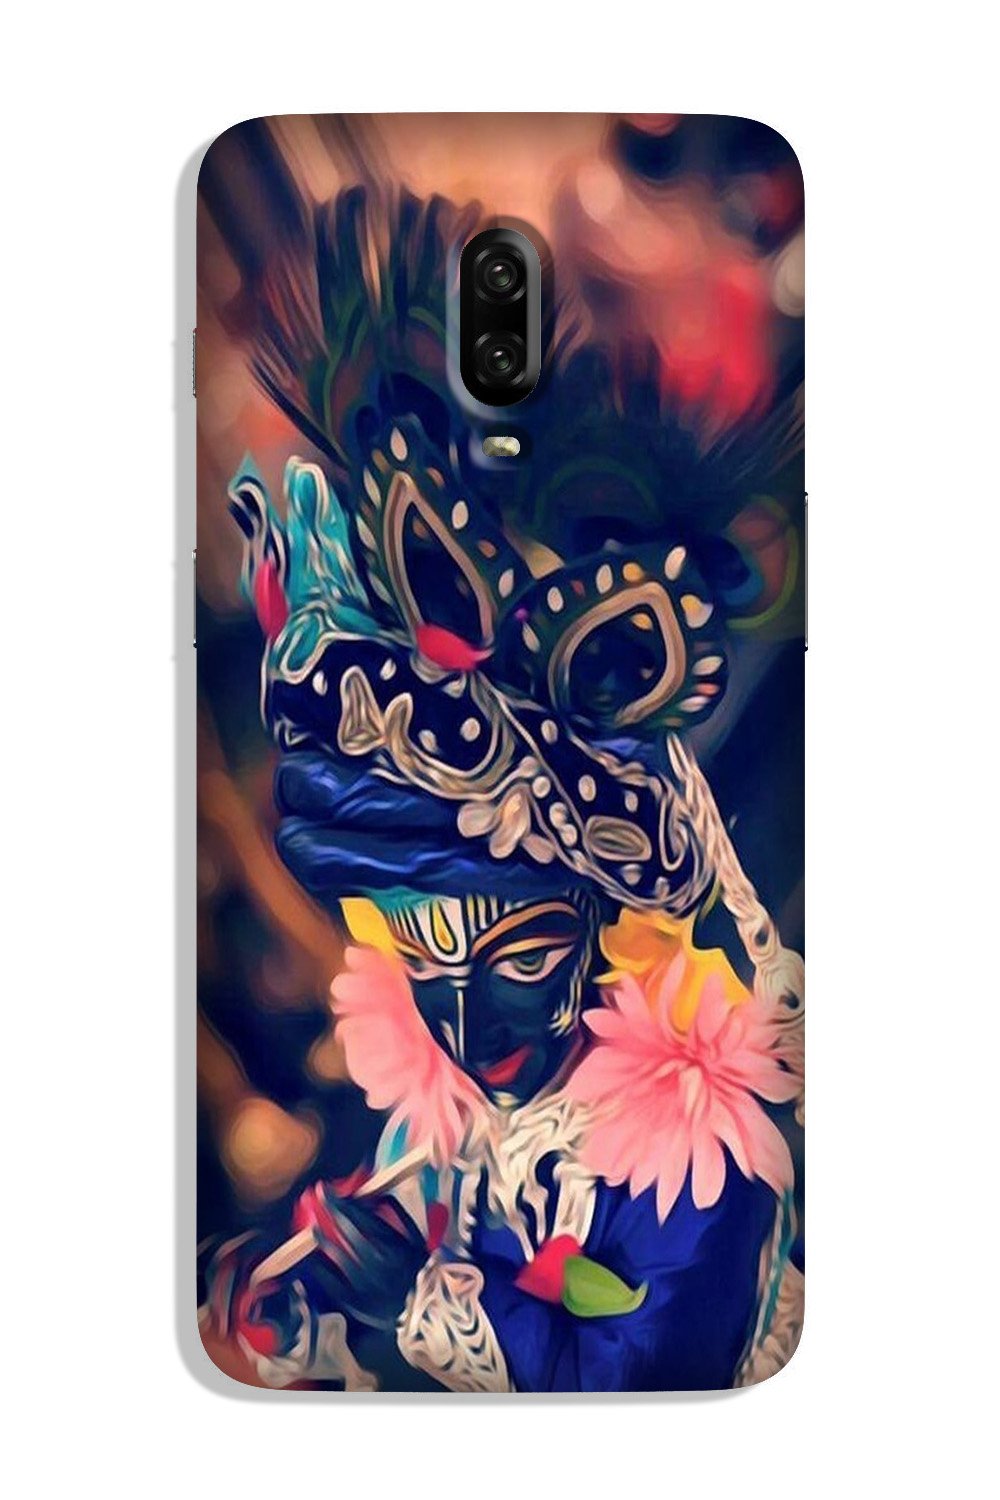 Lord Krishna Case for OnePlus 7